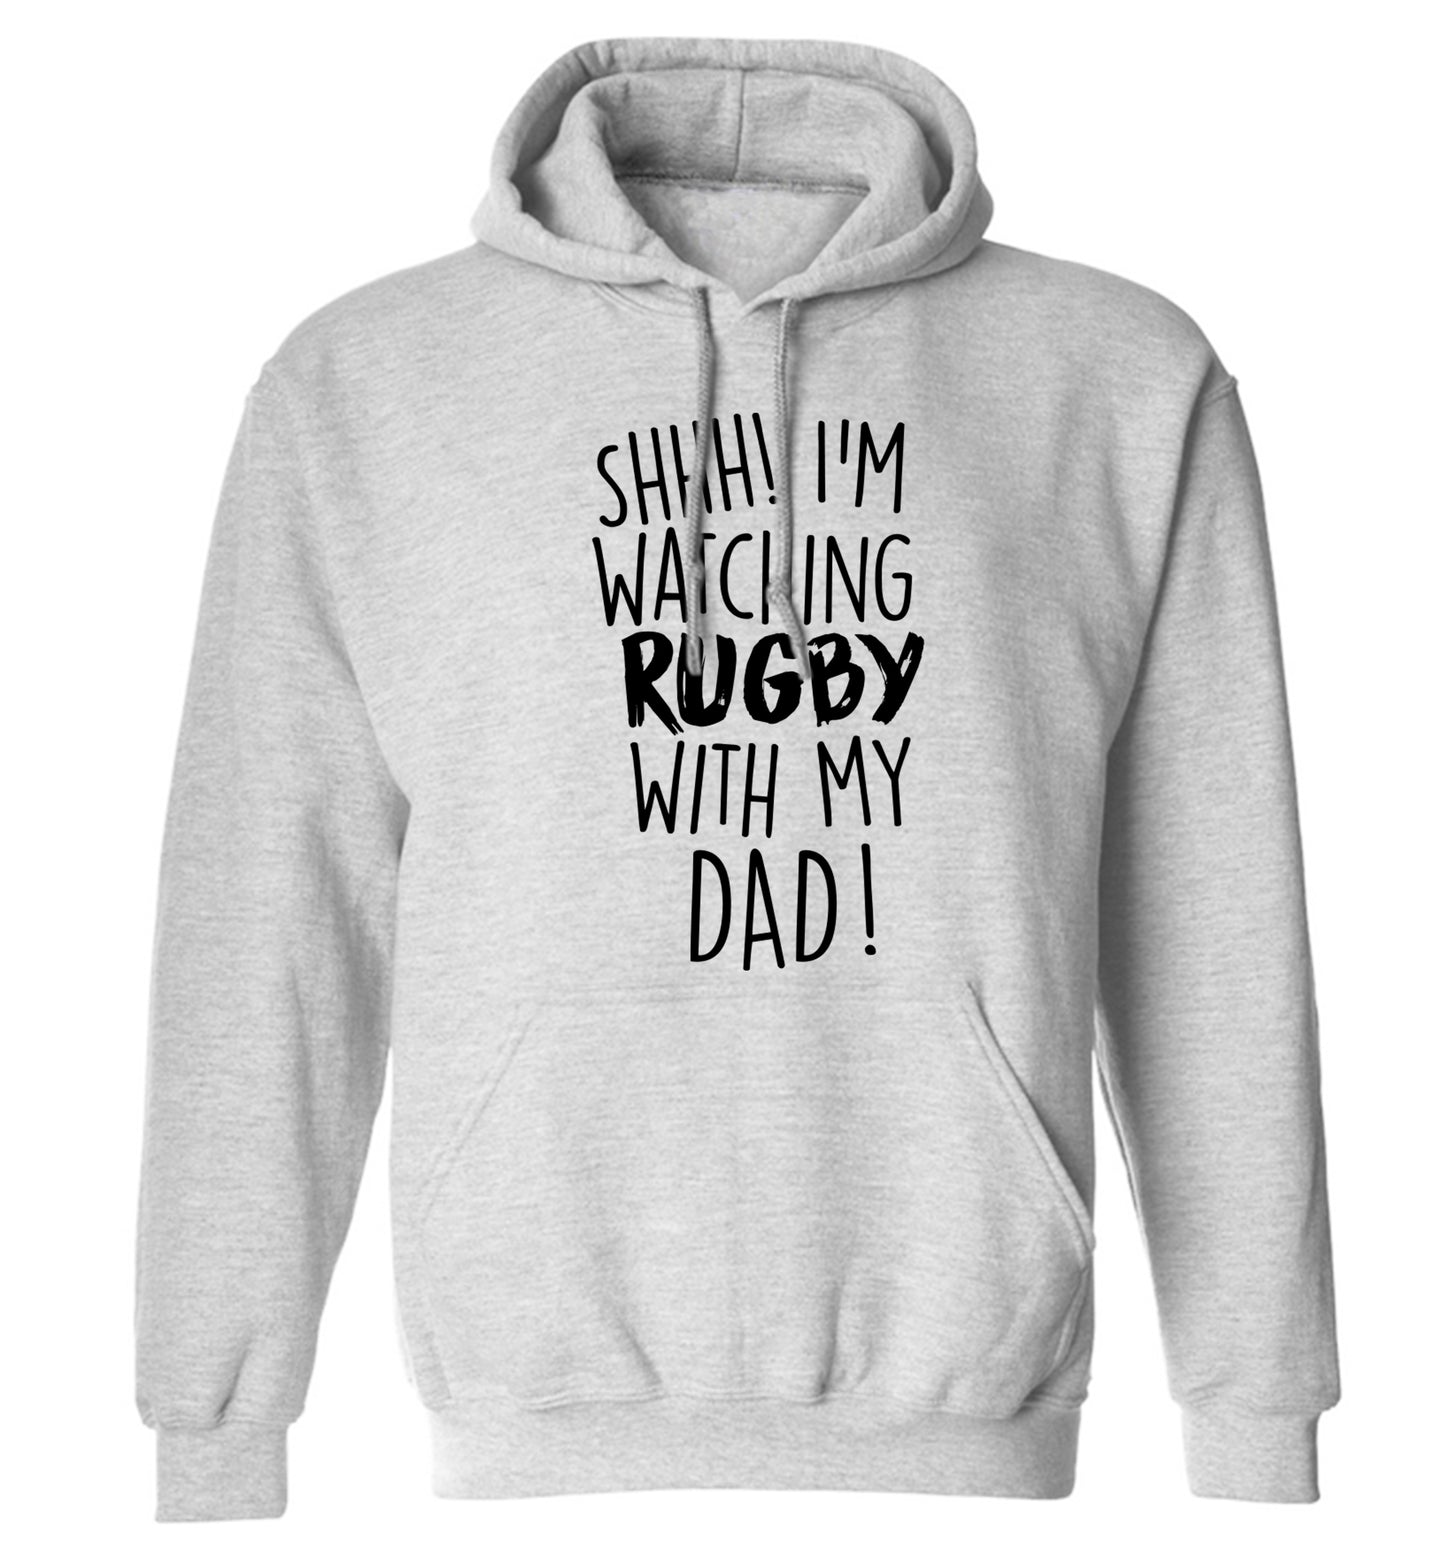 Shh... I'm watching rugby with my dad adults unisex grey hoodie 2XL